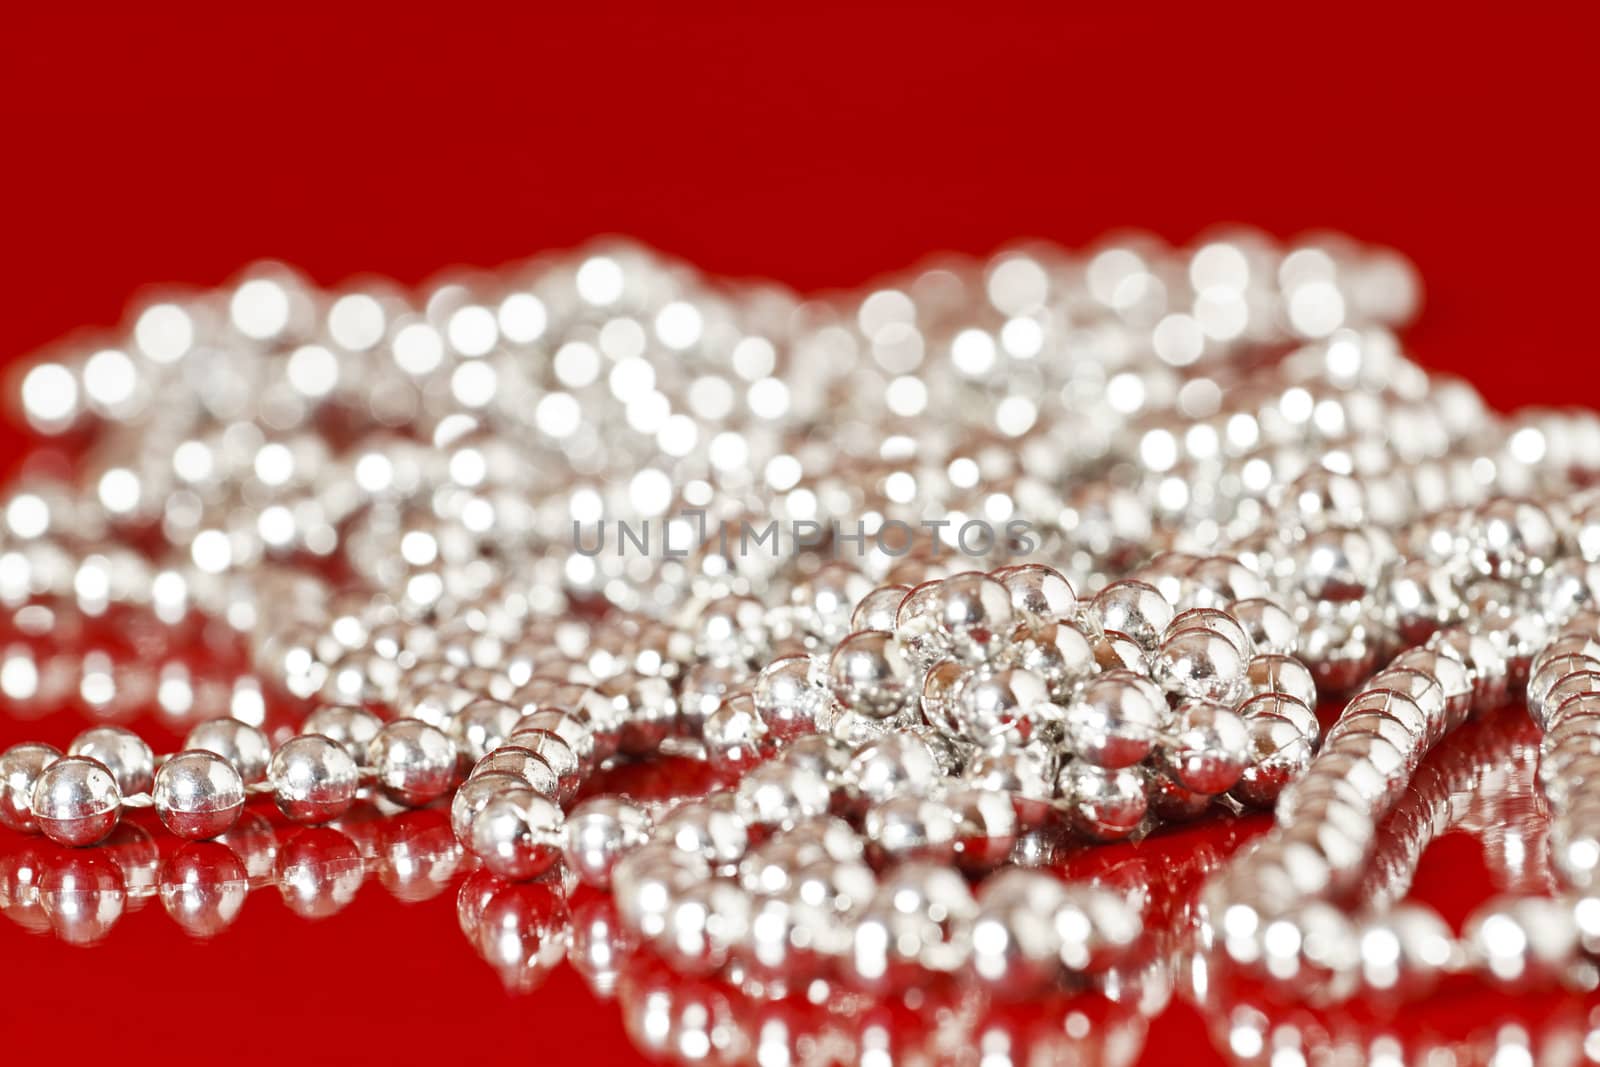 Shiny Silver Pearls on red background